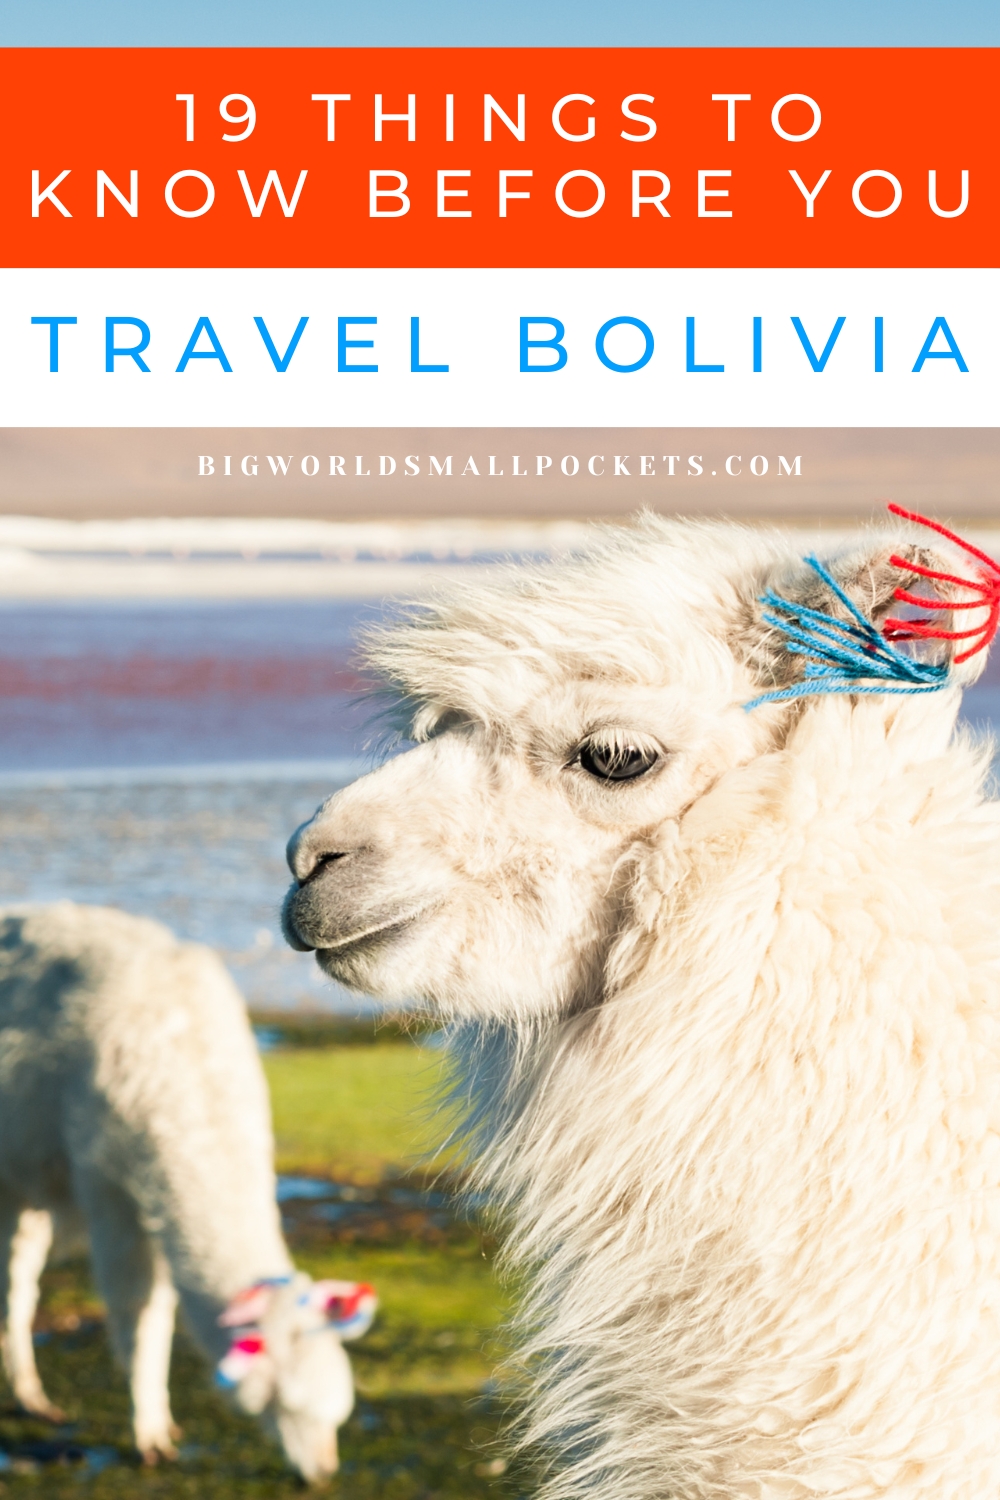 Things to Know Before You Travel Bolivia